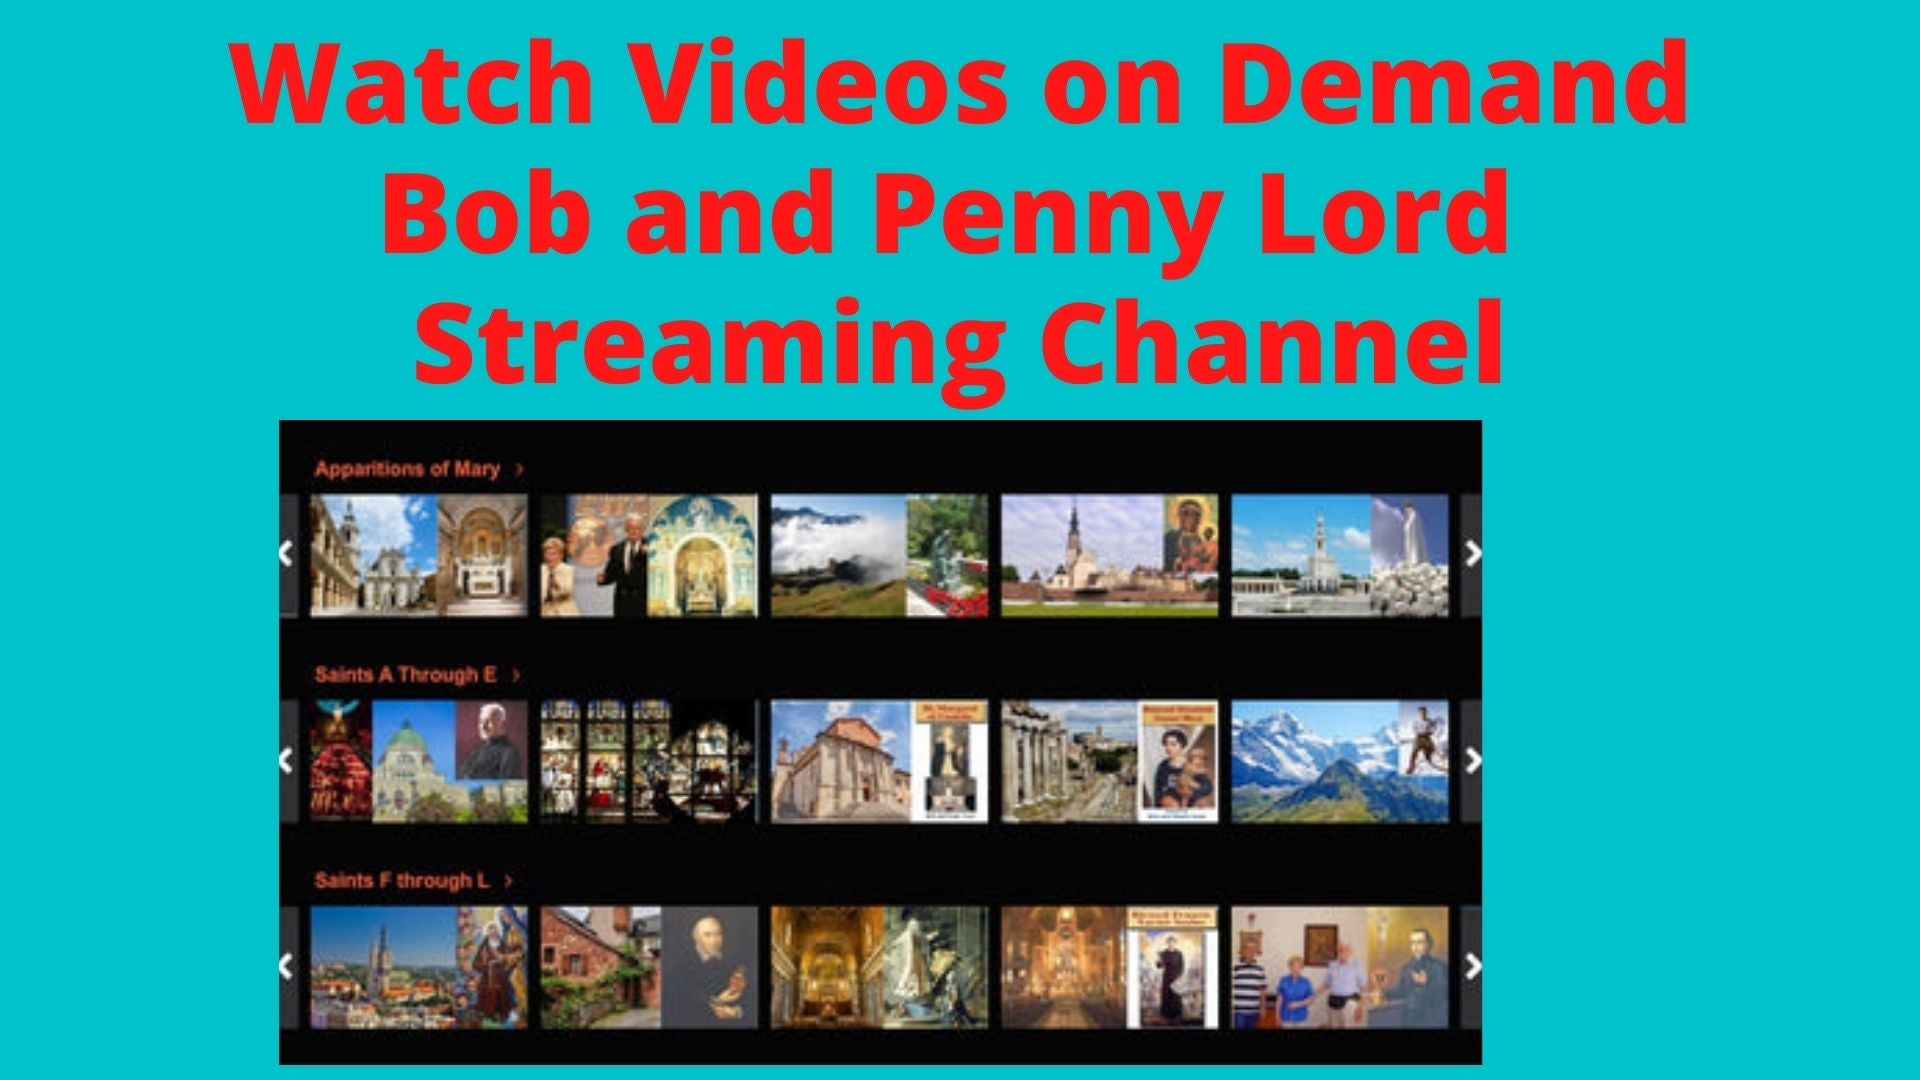 Yearly Subscription to Bob and Penny Lord TV Channel - Bob and Penny Lord